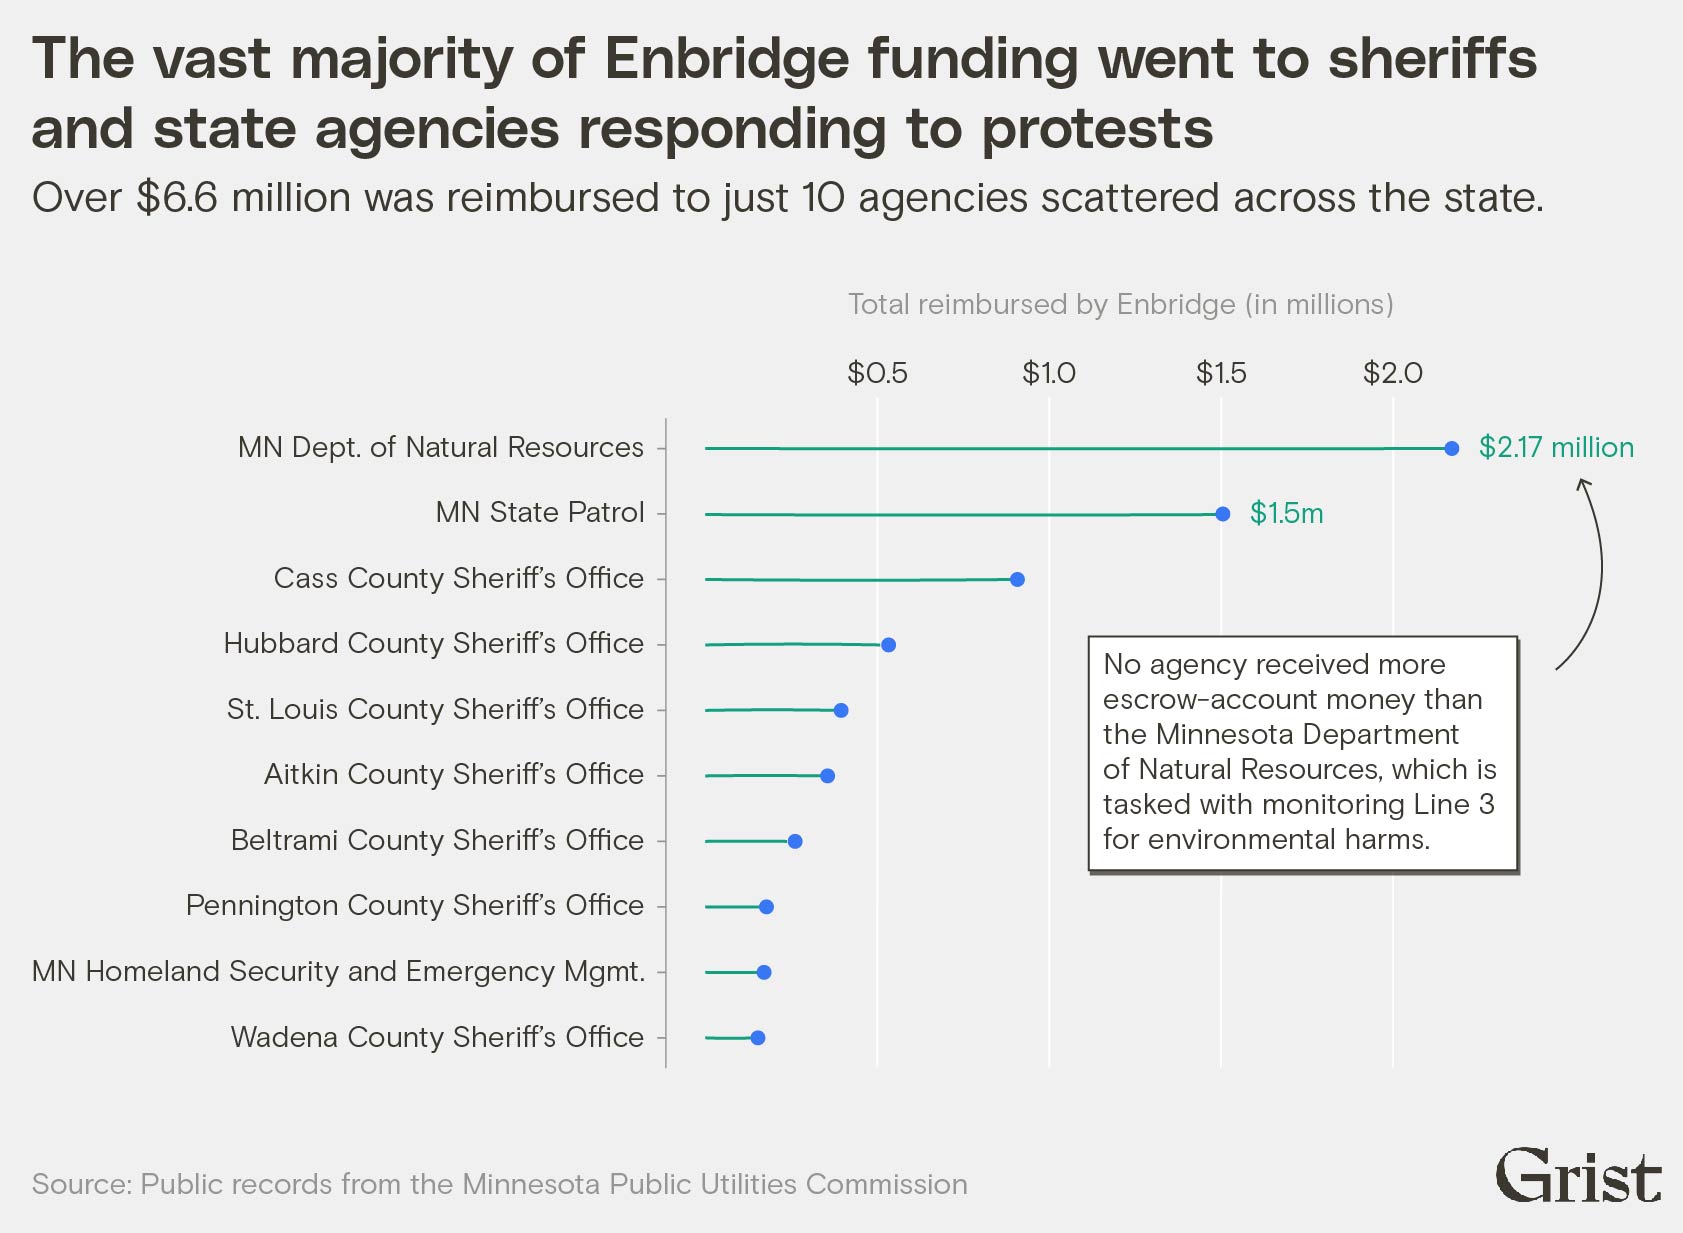 A lollipop chart shows the top agencies to receive reimbursements from Enbridge. The Minnesota Dept. of Natural Resources was the top recipient at over $2 million.